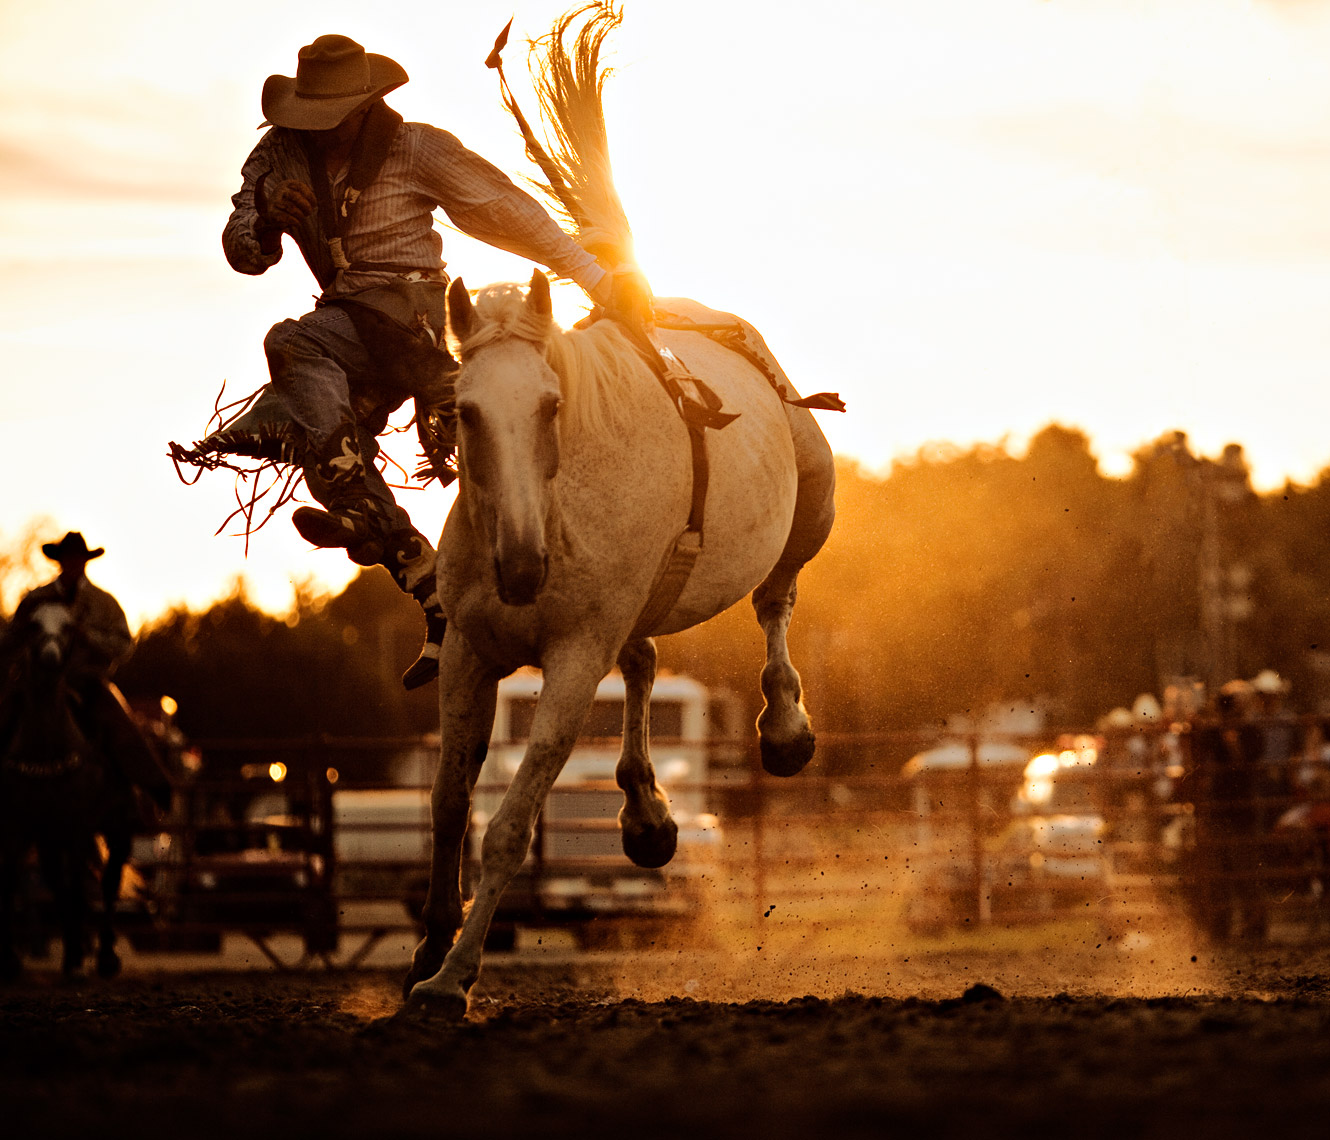 Photograph of rodeo bronco